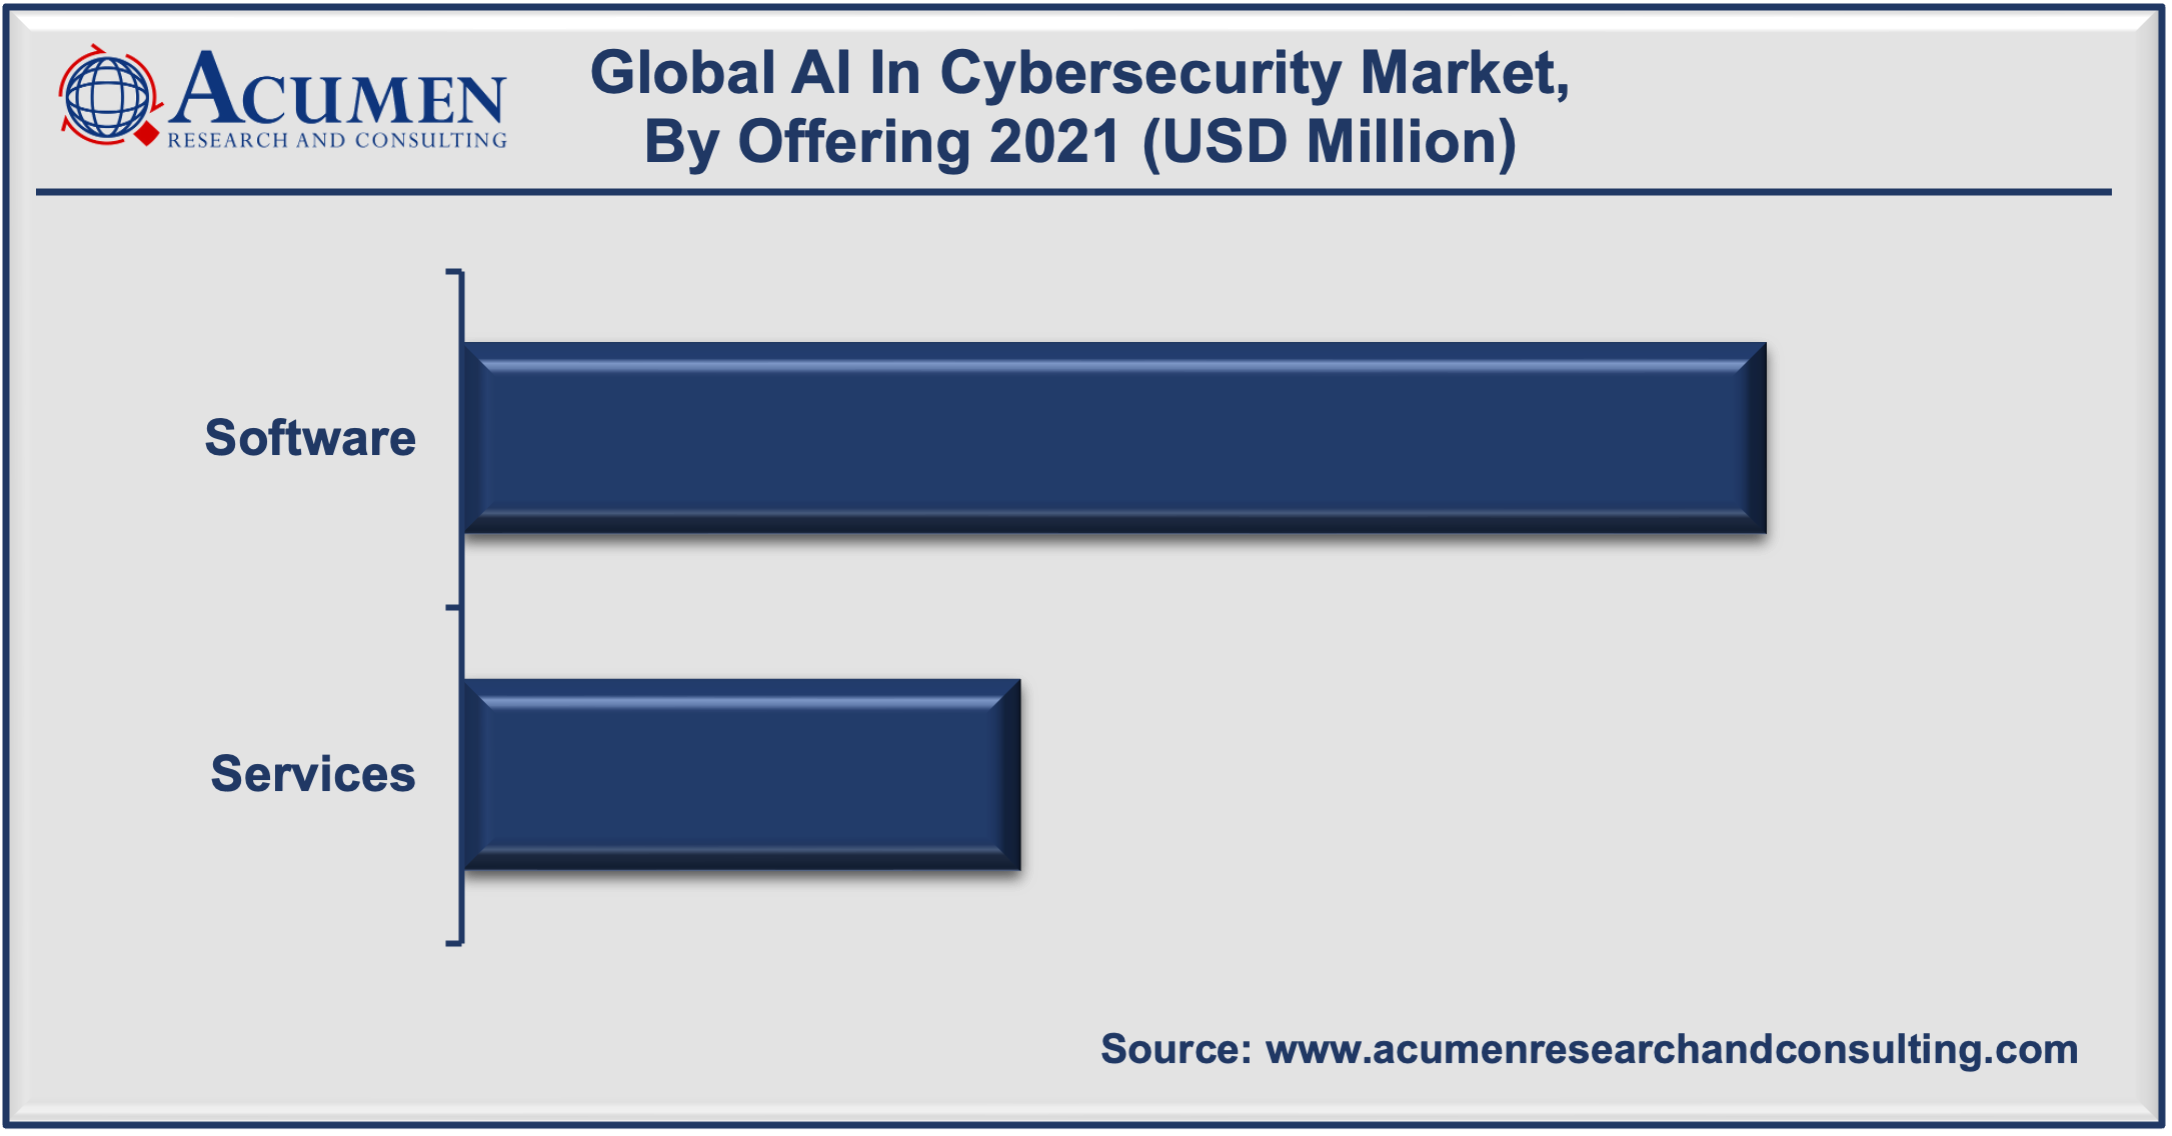 Artificial Intelligence (AI) in Cybersecurity Market Share accounted for USD 14.9 Billion in 2021 and is estimated to reach the market value of USD 133.8 Billion by 2030.